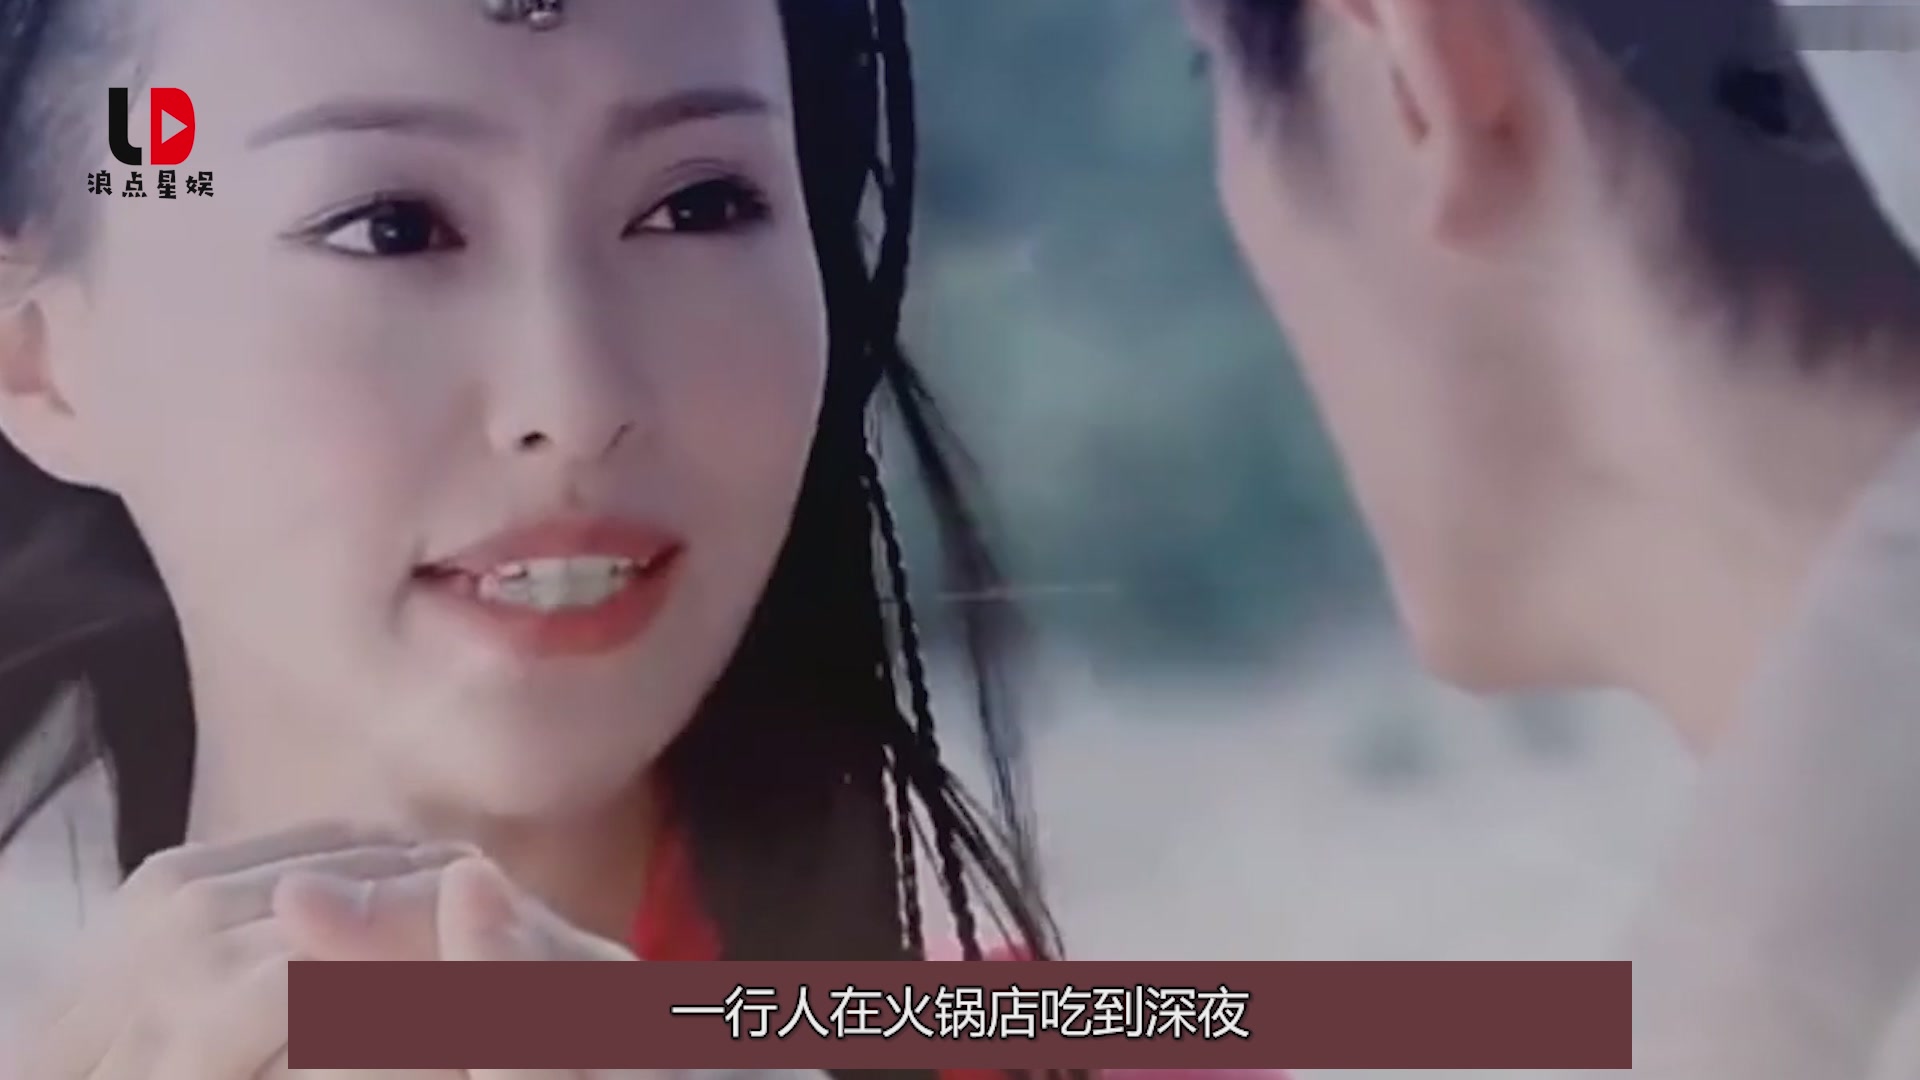 Tang Yan is pregnant? Walking with the help of an assistant